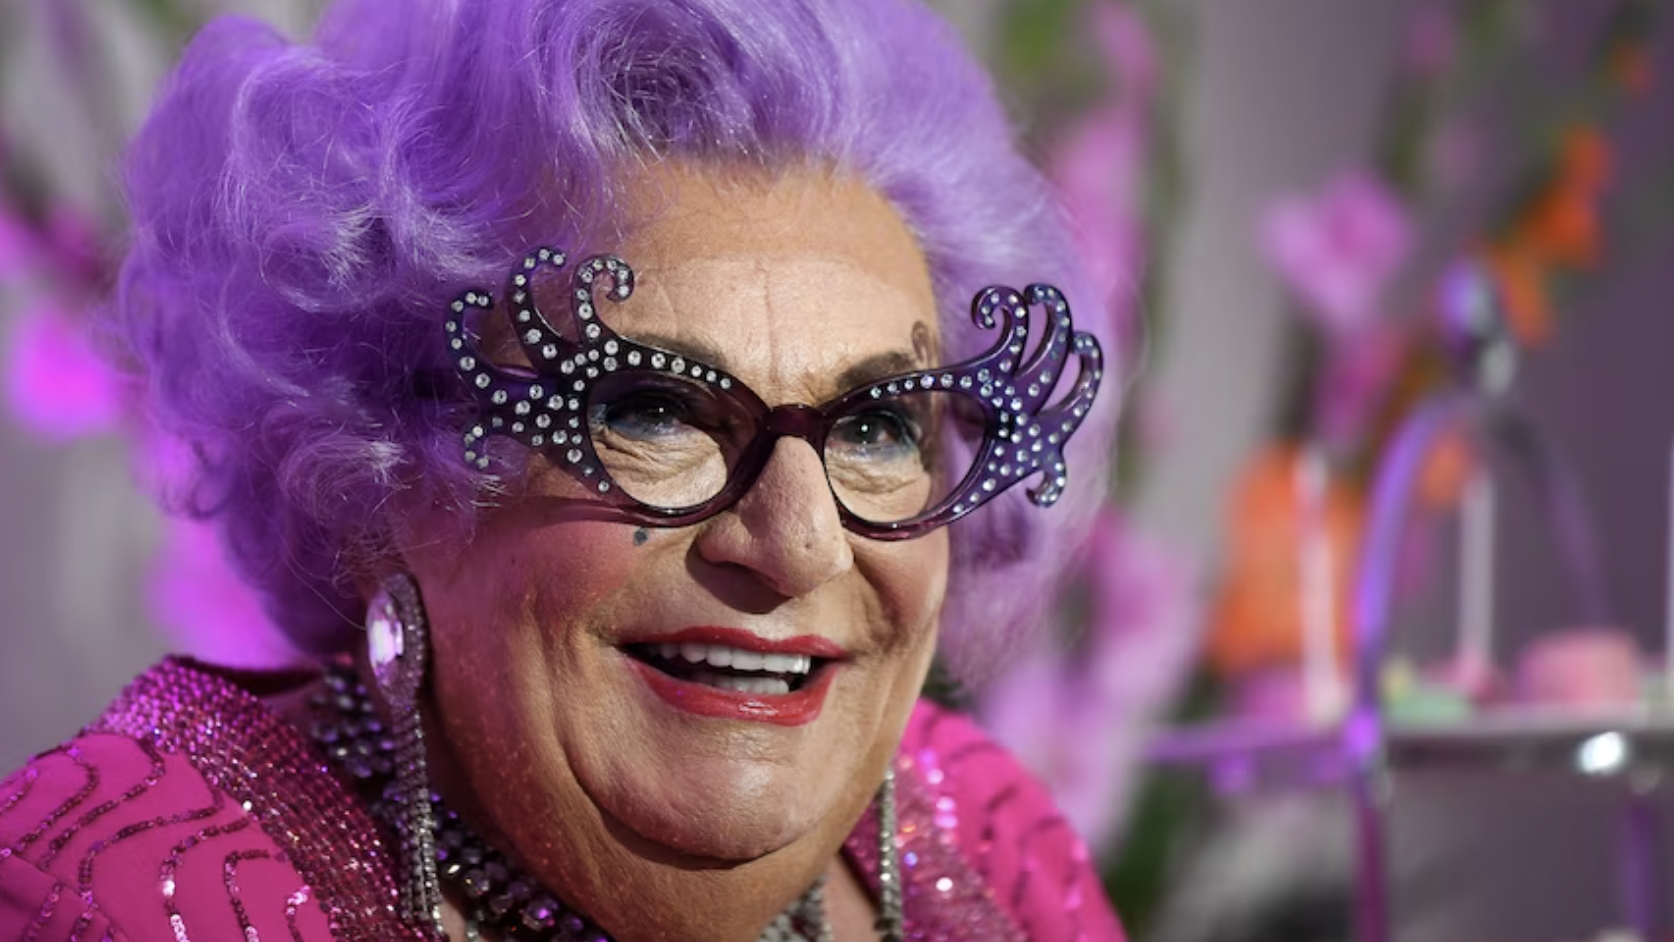 Dame Edna a.k.a. Barry Humphries, Dead at 89